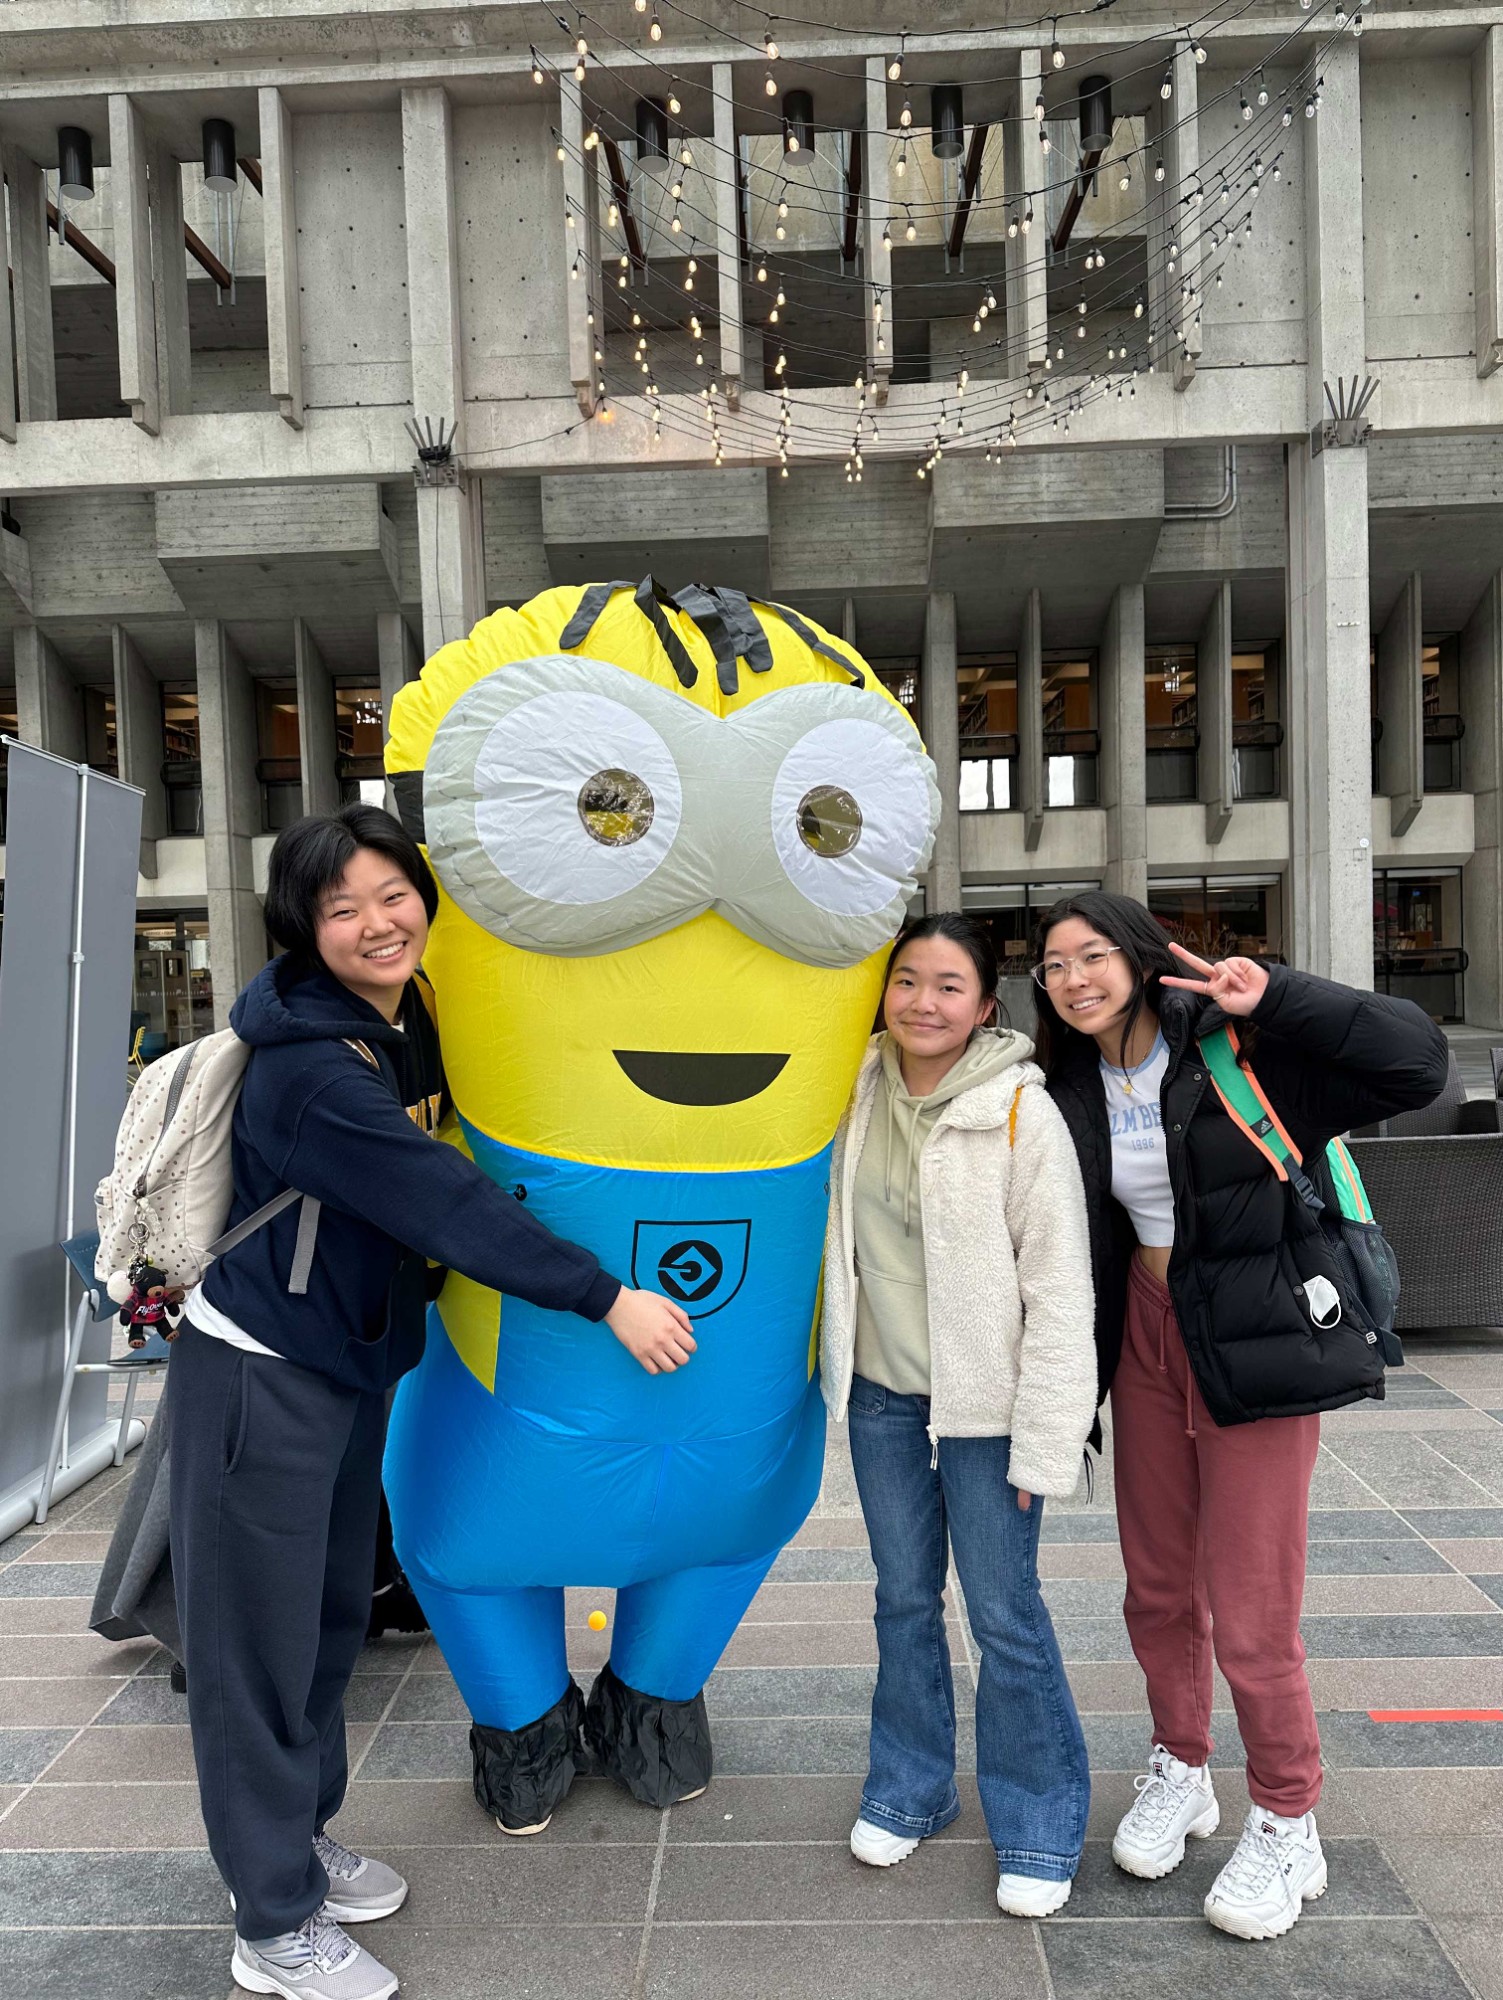 3 students hanging out with a minion costume in front of SFU library smiling. Photo is taken by Alice, a student resident living in Barbara Rae House